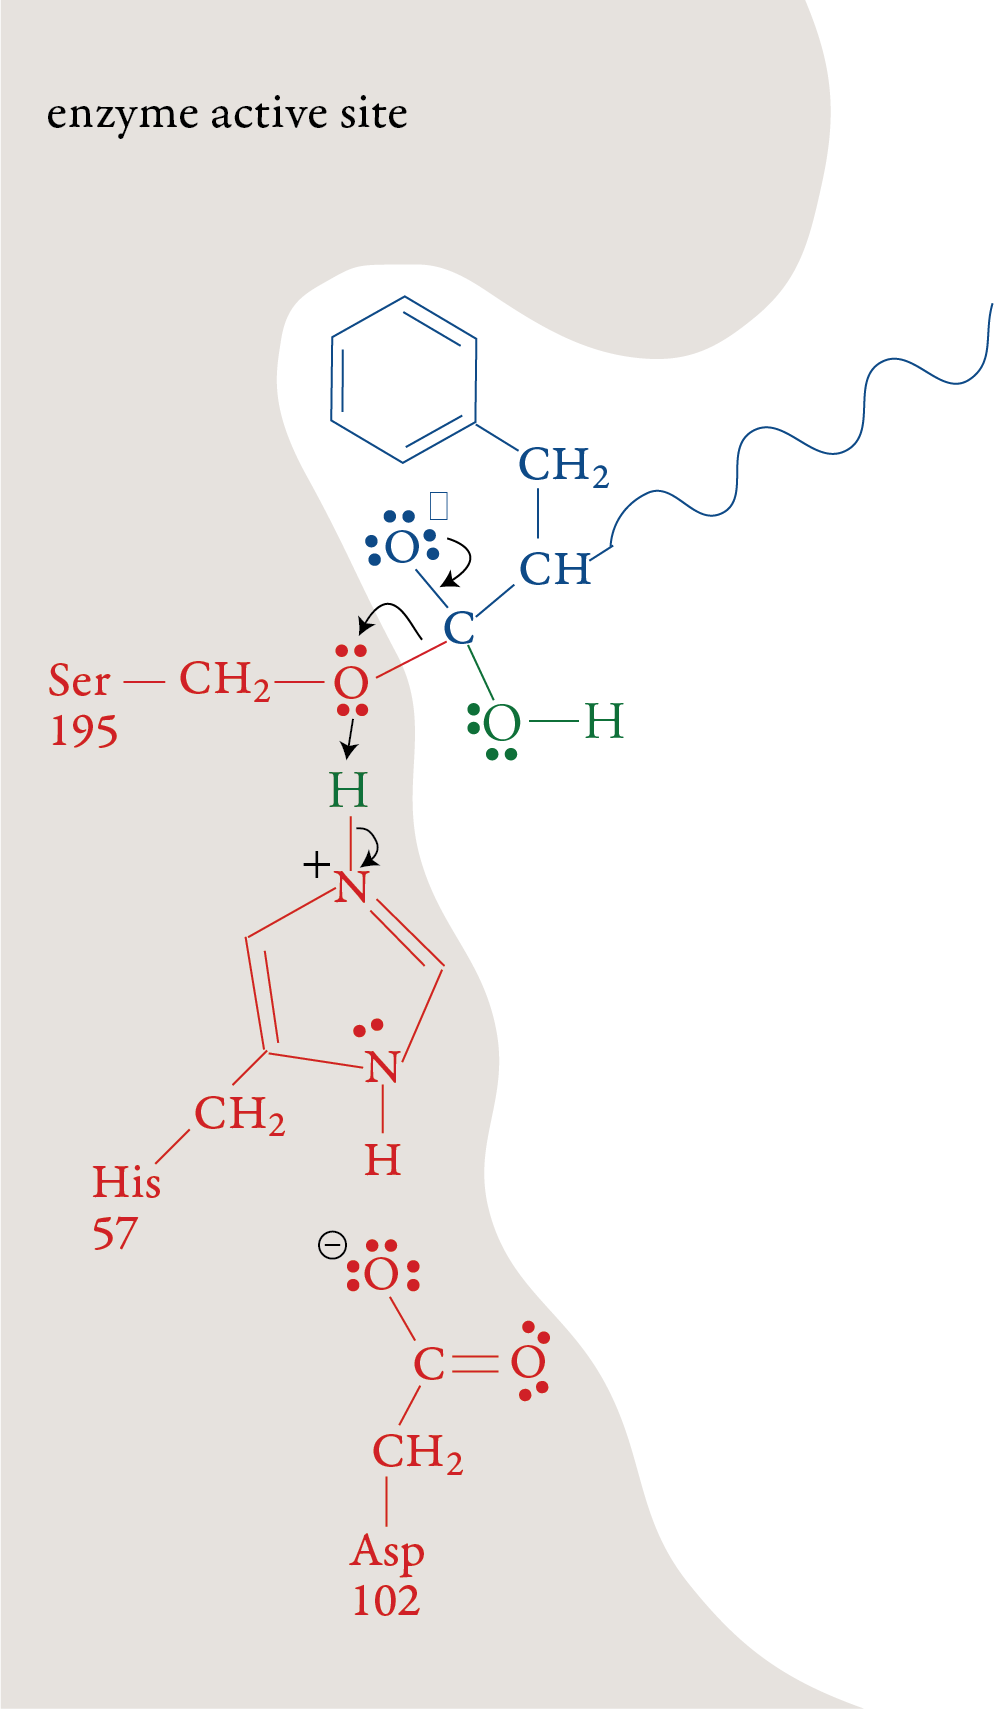 Image of the fifth step in the chymotrypsin mechanism